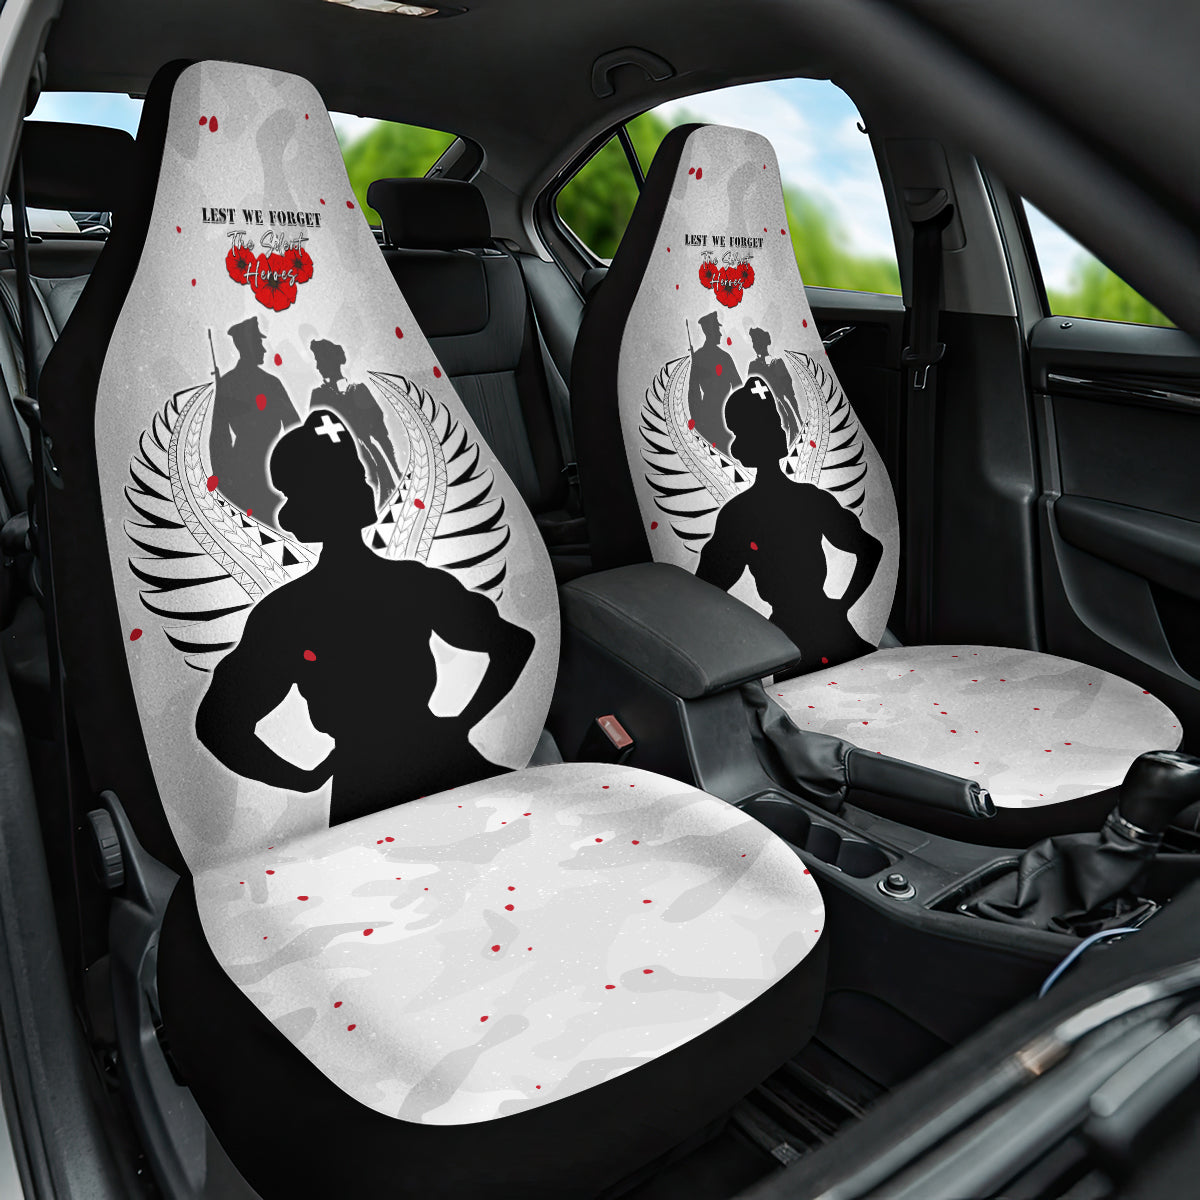 New Zealand ANZAC Day Car Seat Cover For The Nurse Lest We Forget